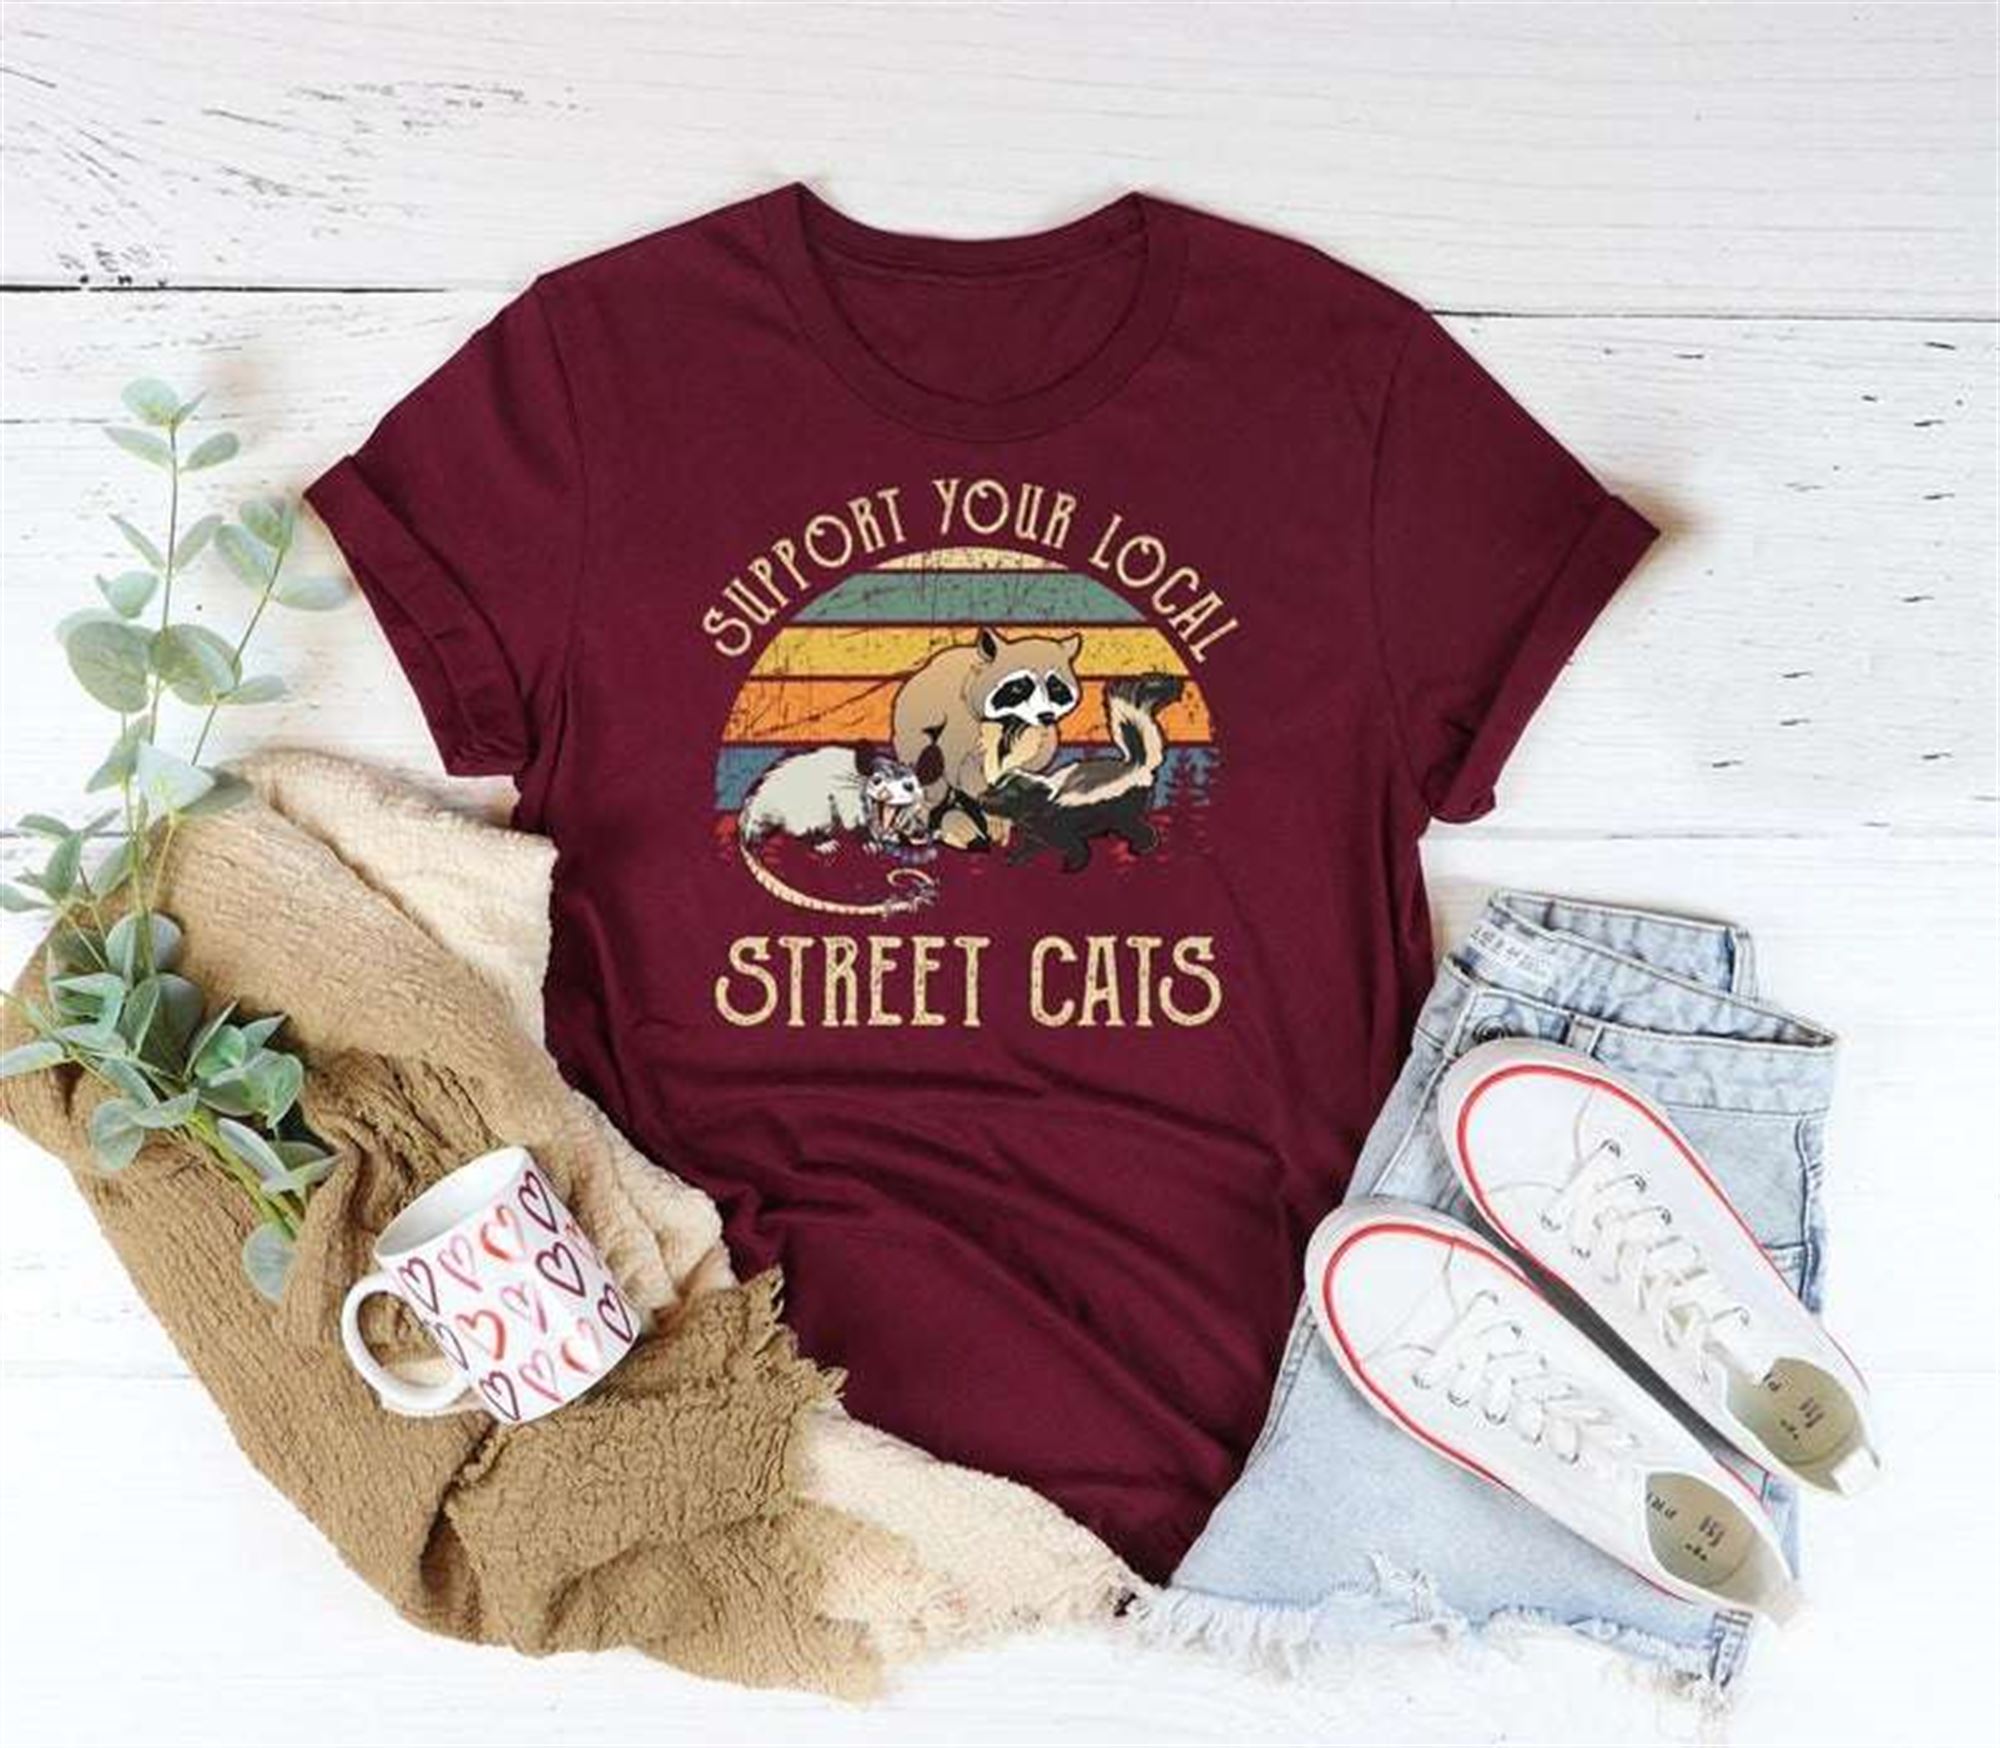 Support Your Local Street Cats Vintage T-shirt Plus Size Up To 5xl